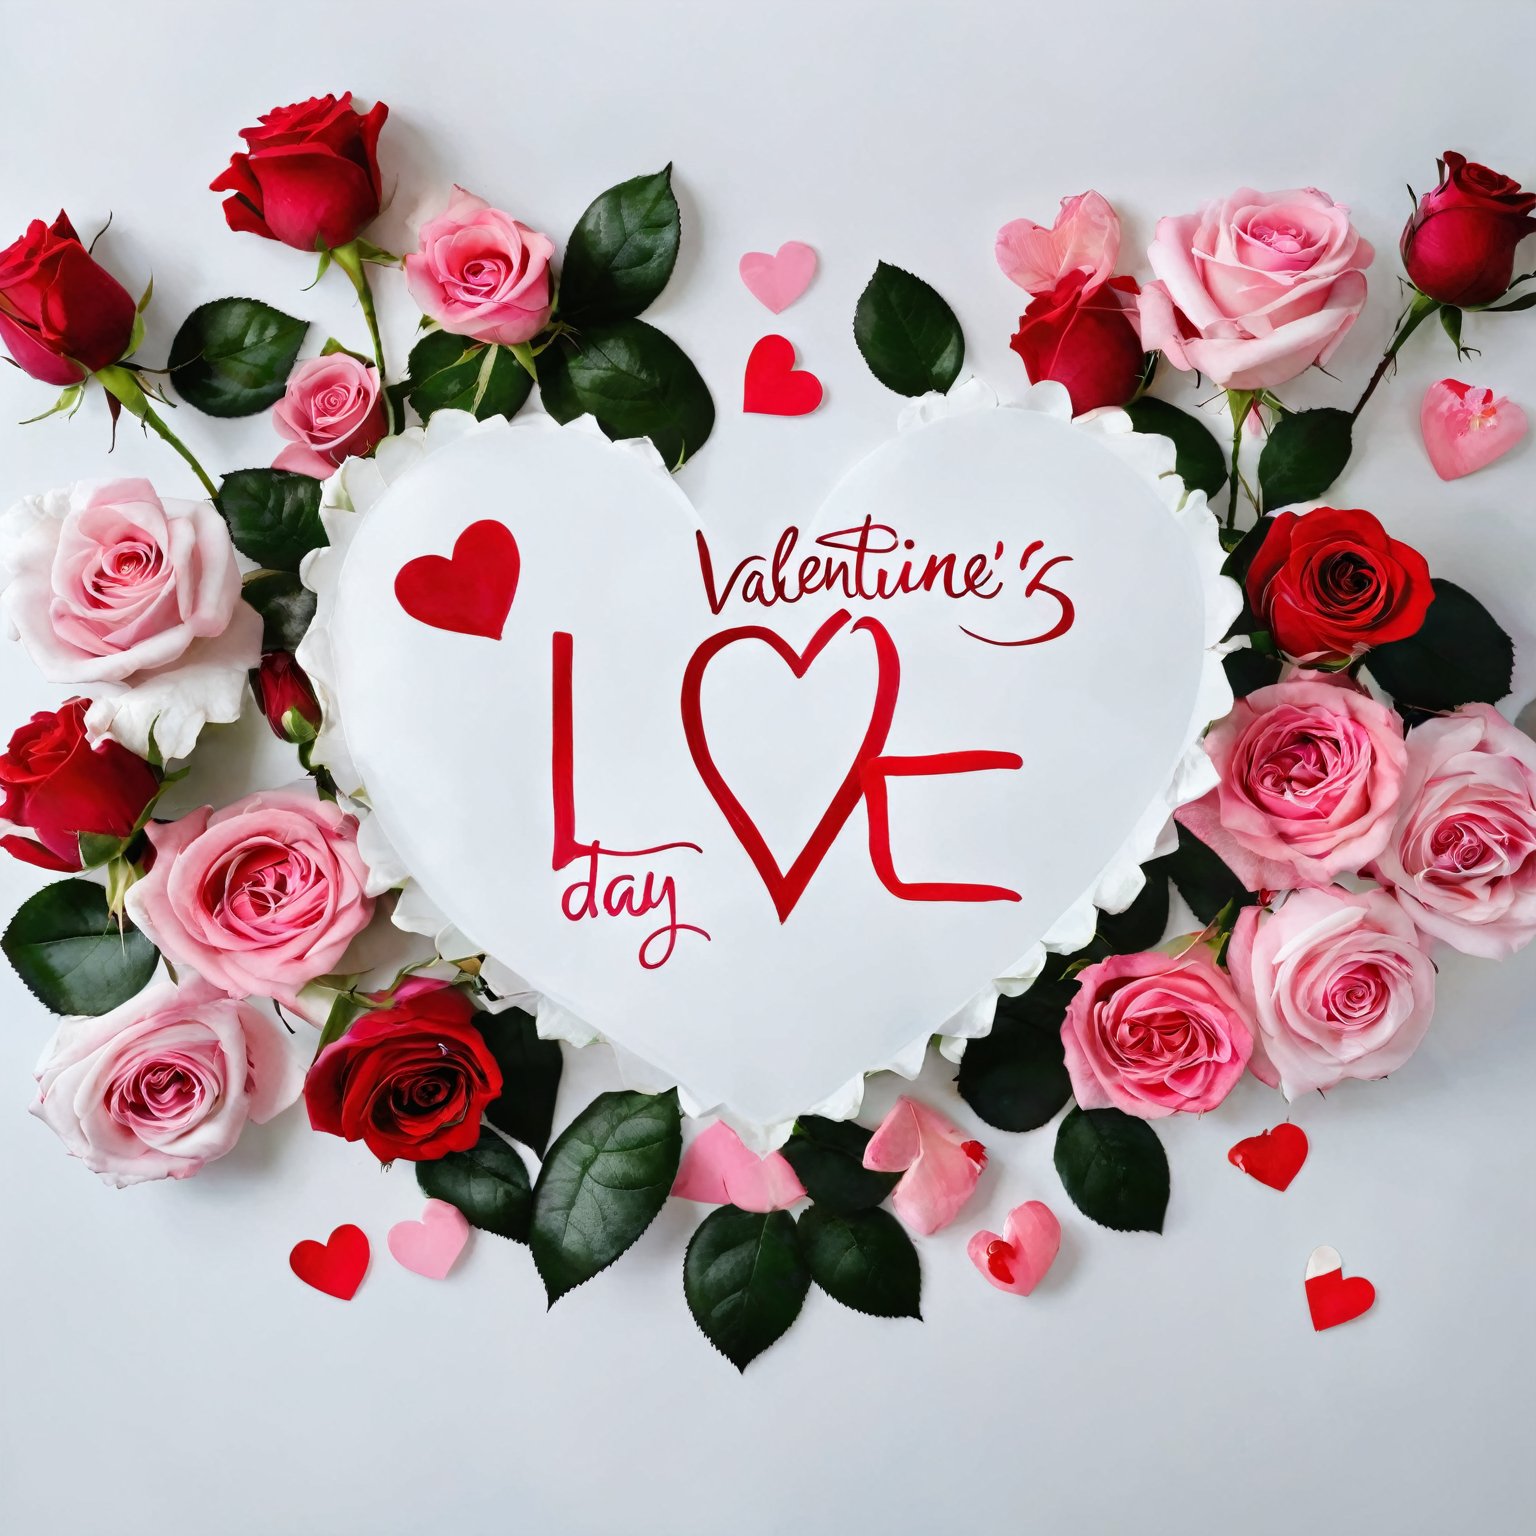 AiArtV,Valentines Day, simple background,white background,flower,heart,signature,no humans,rose,leaf,traditional media,red flower,pink flower,pink rose,still life